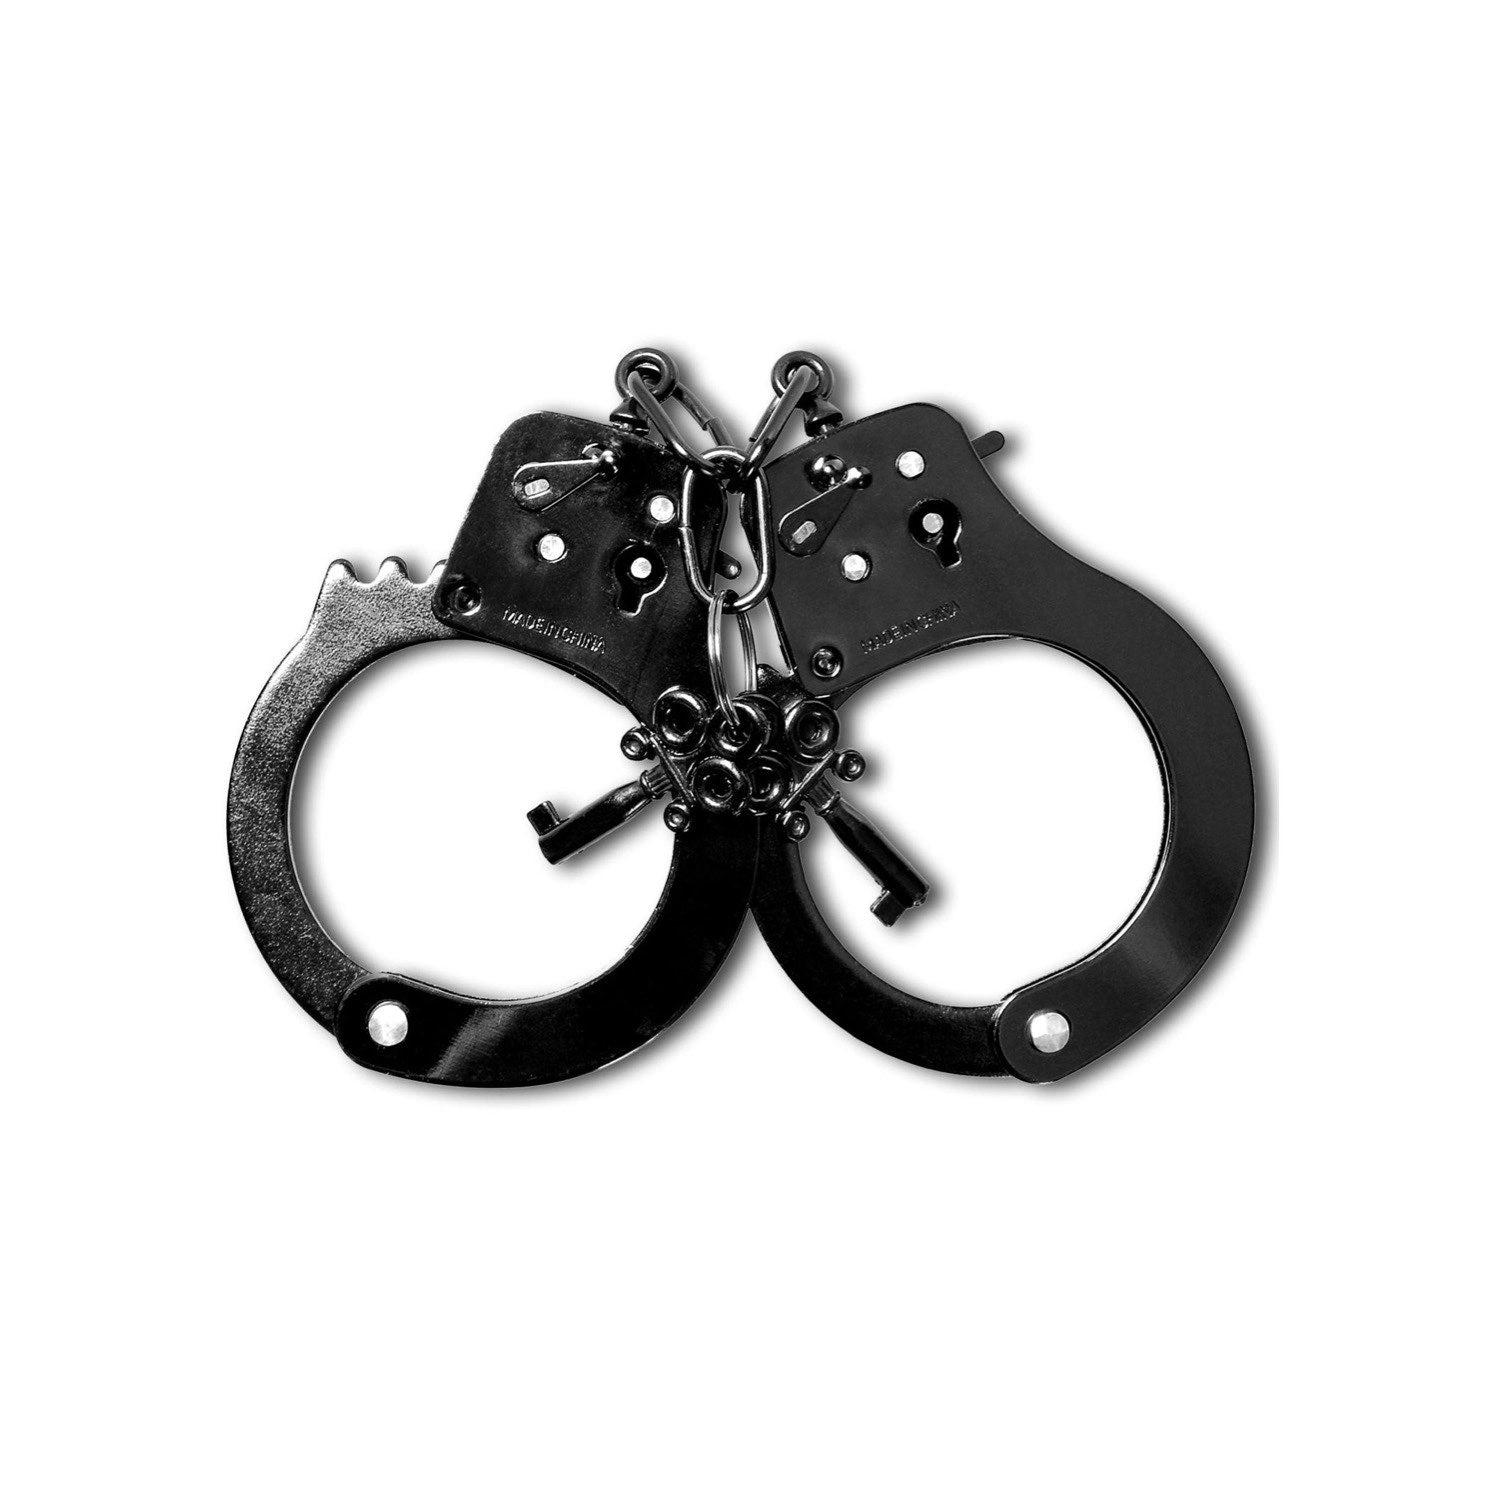 Fetish Fantasy Series Anodized Cuffs - Black Metal Restraints by Pipedream